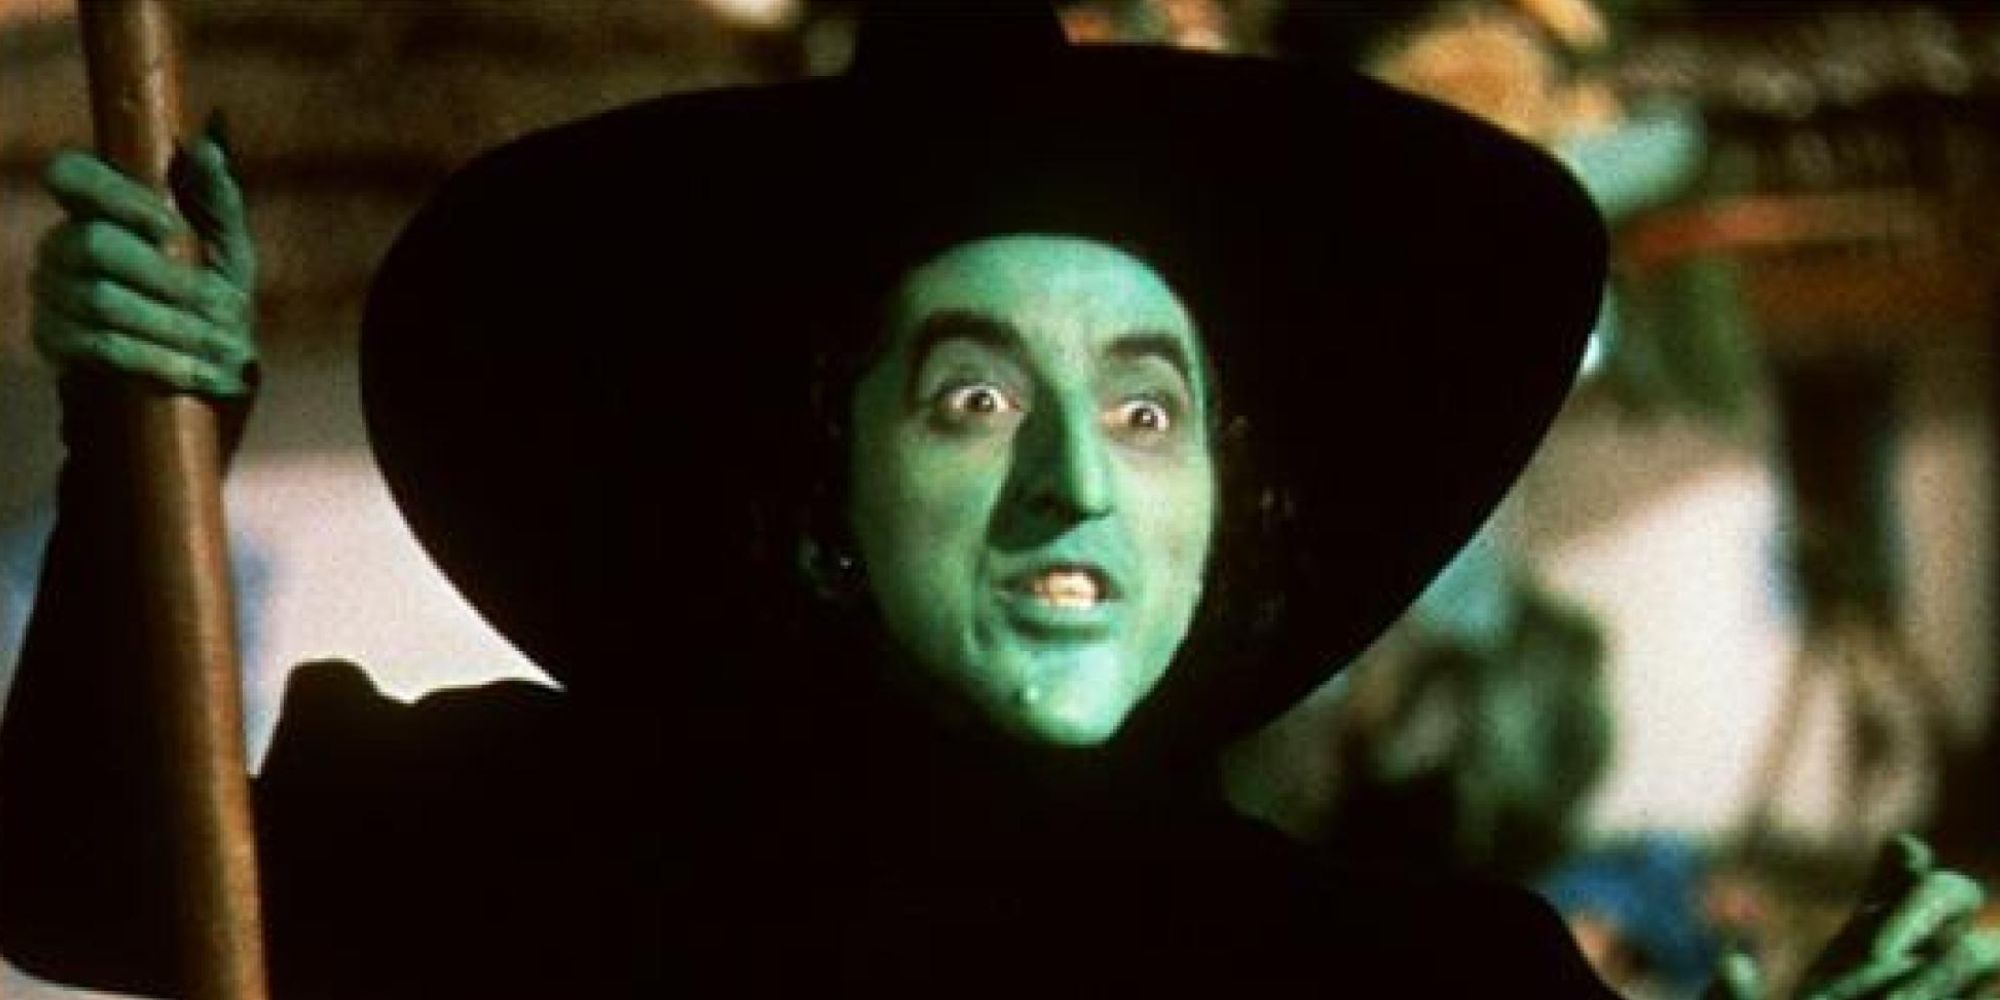 Elphaba, the Wicked Witch of the West